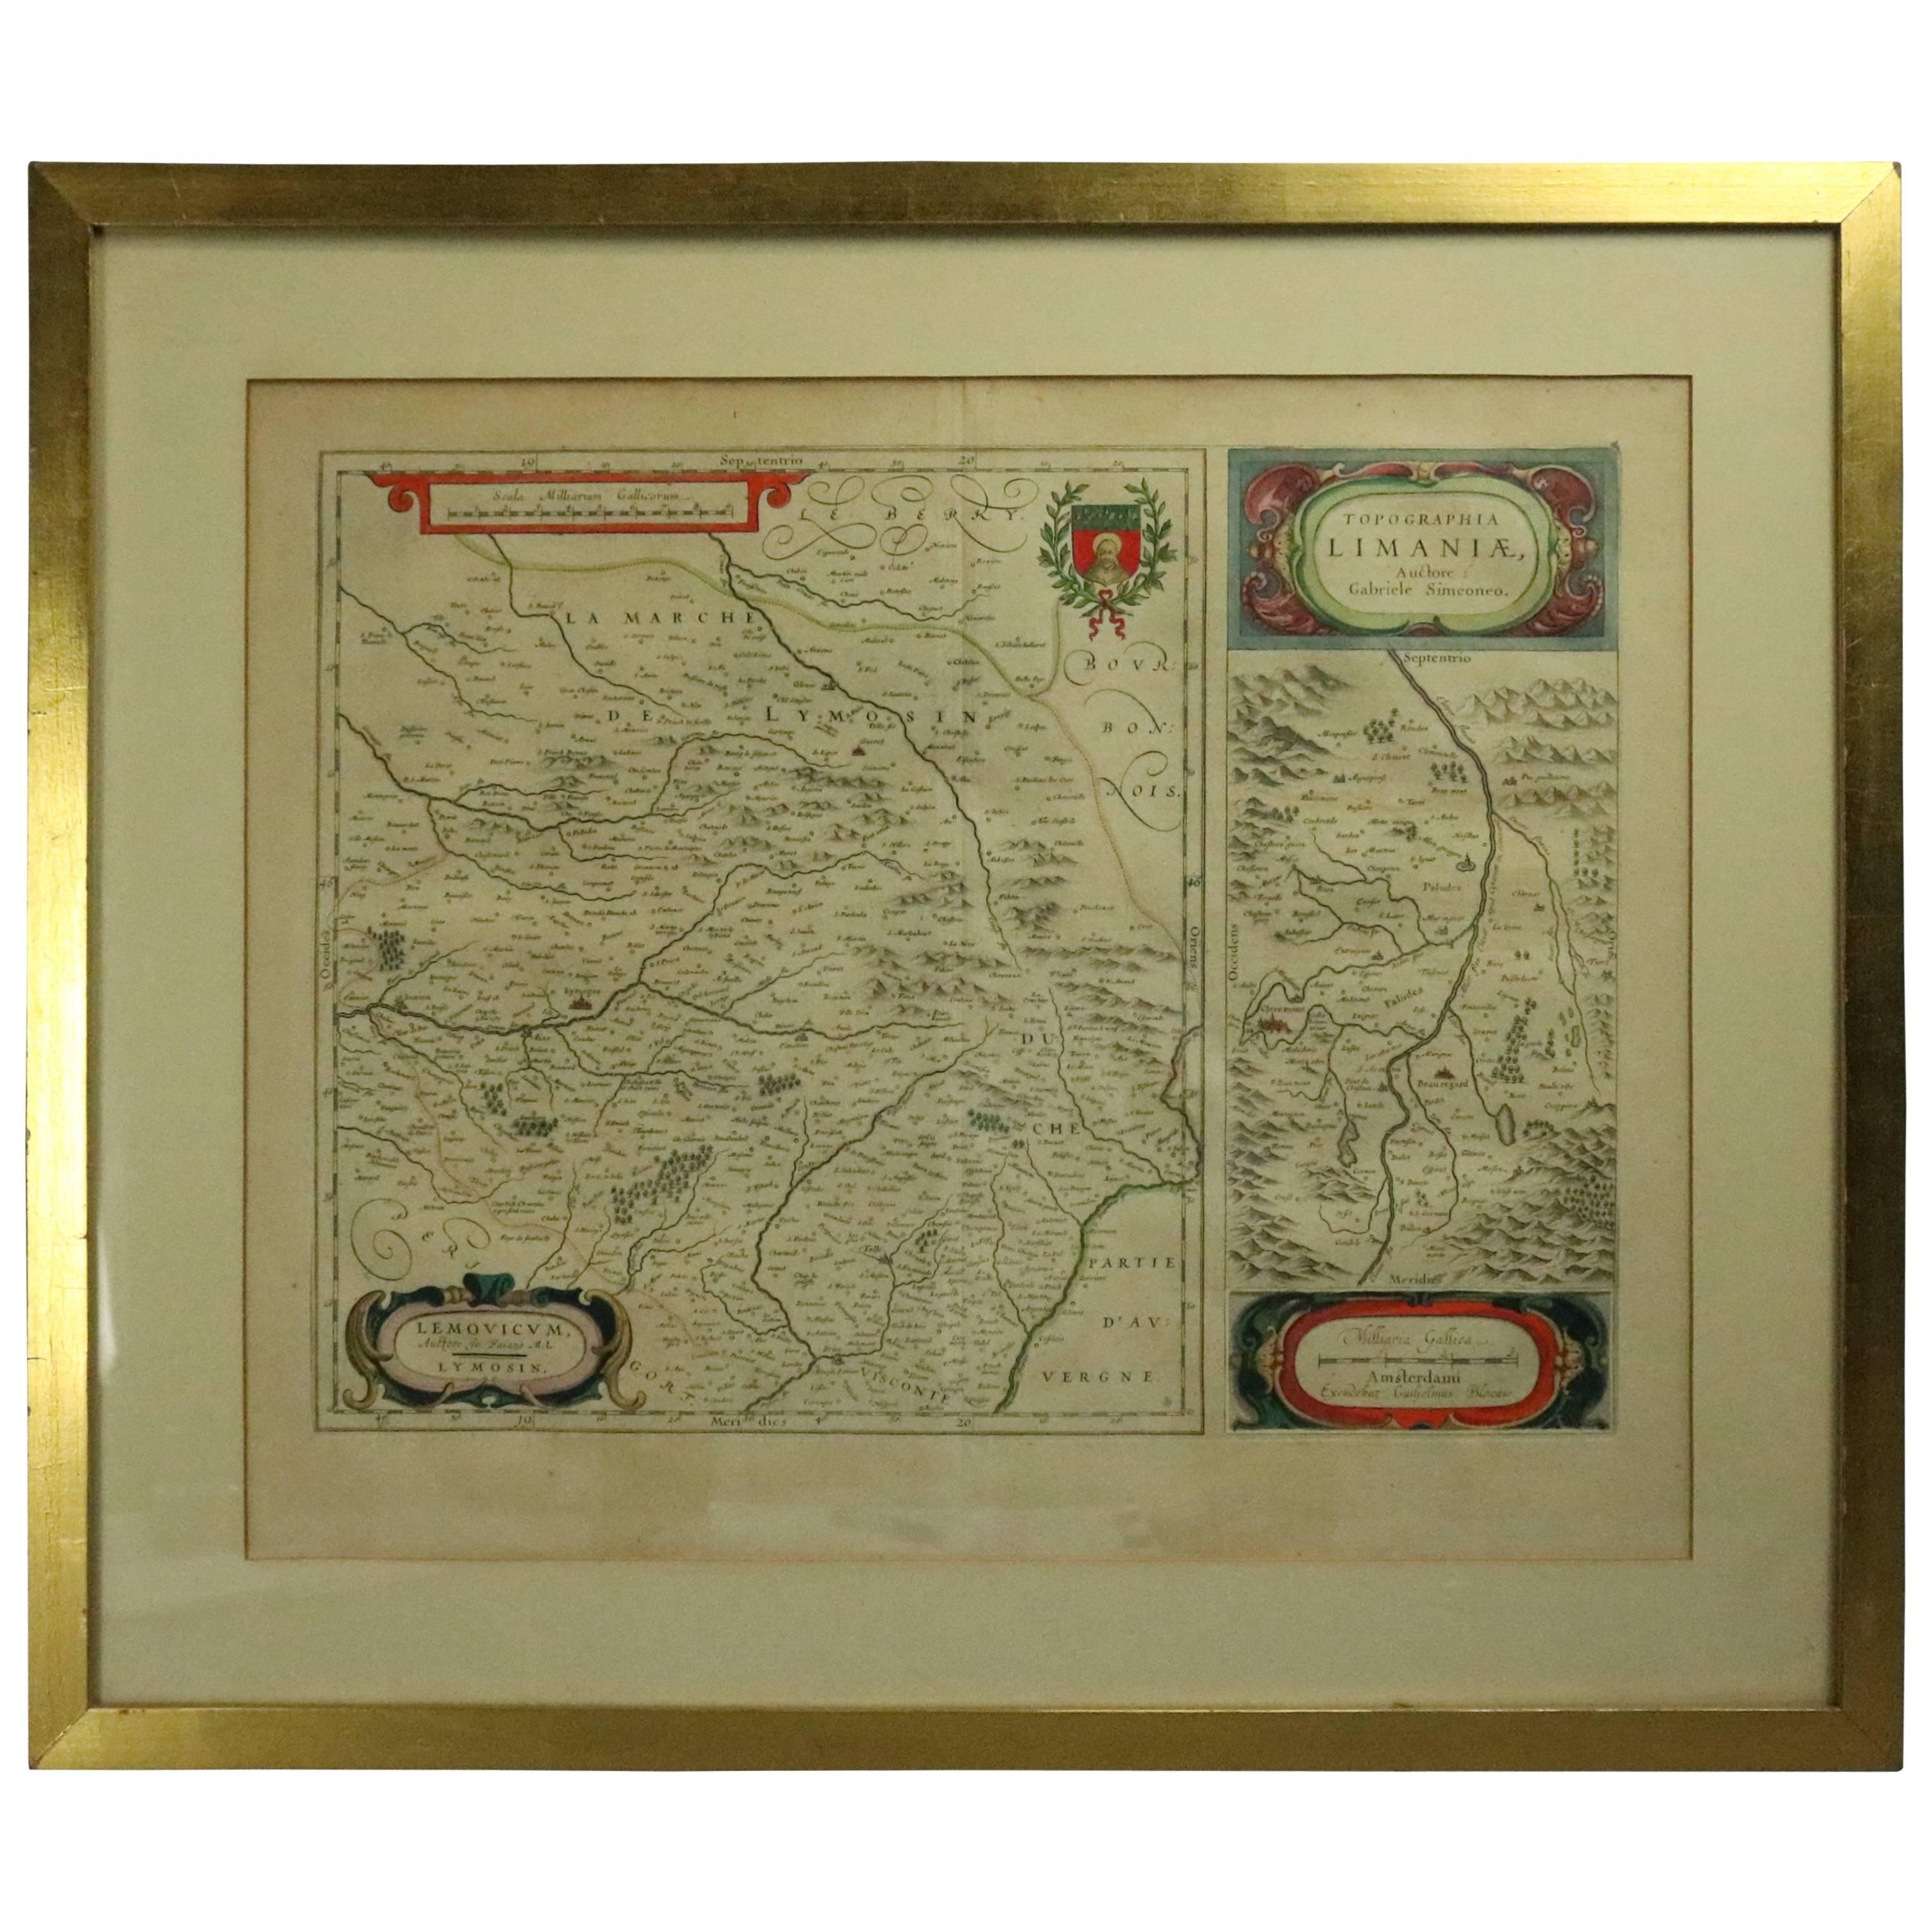 Antique French Copper Engraved and Hand Colored Maps, Amsterdam, 18th Century